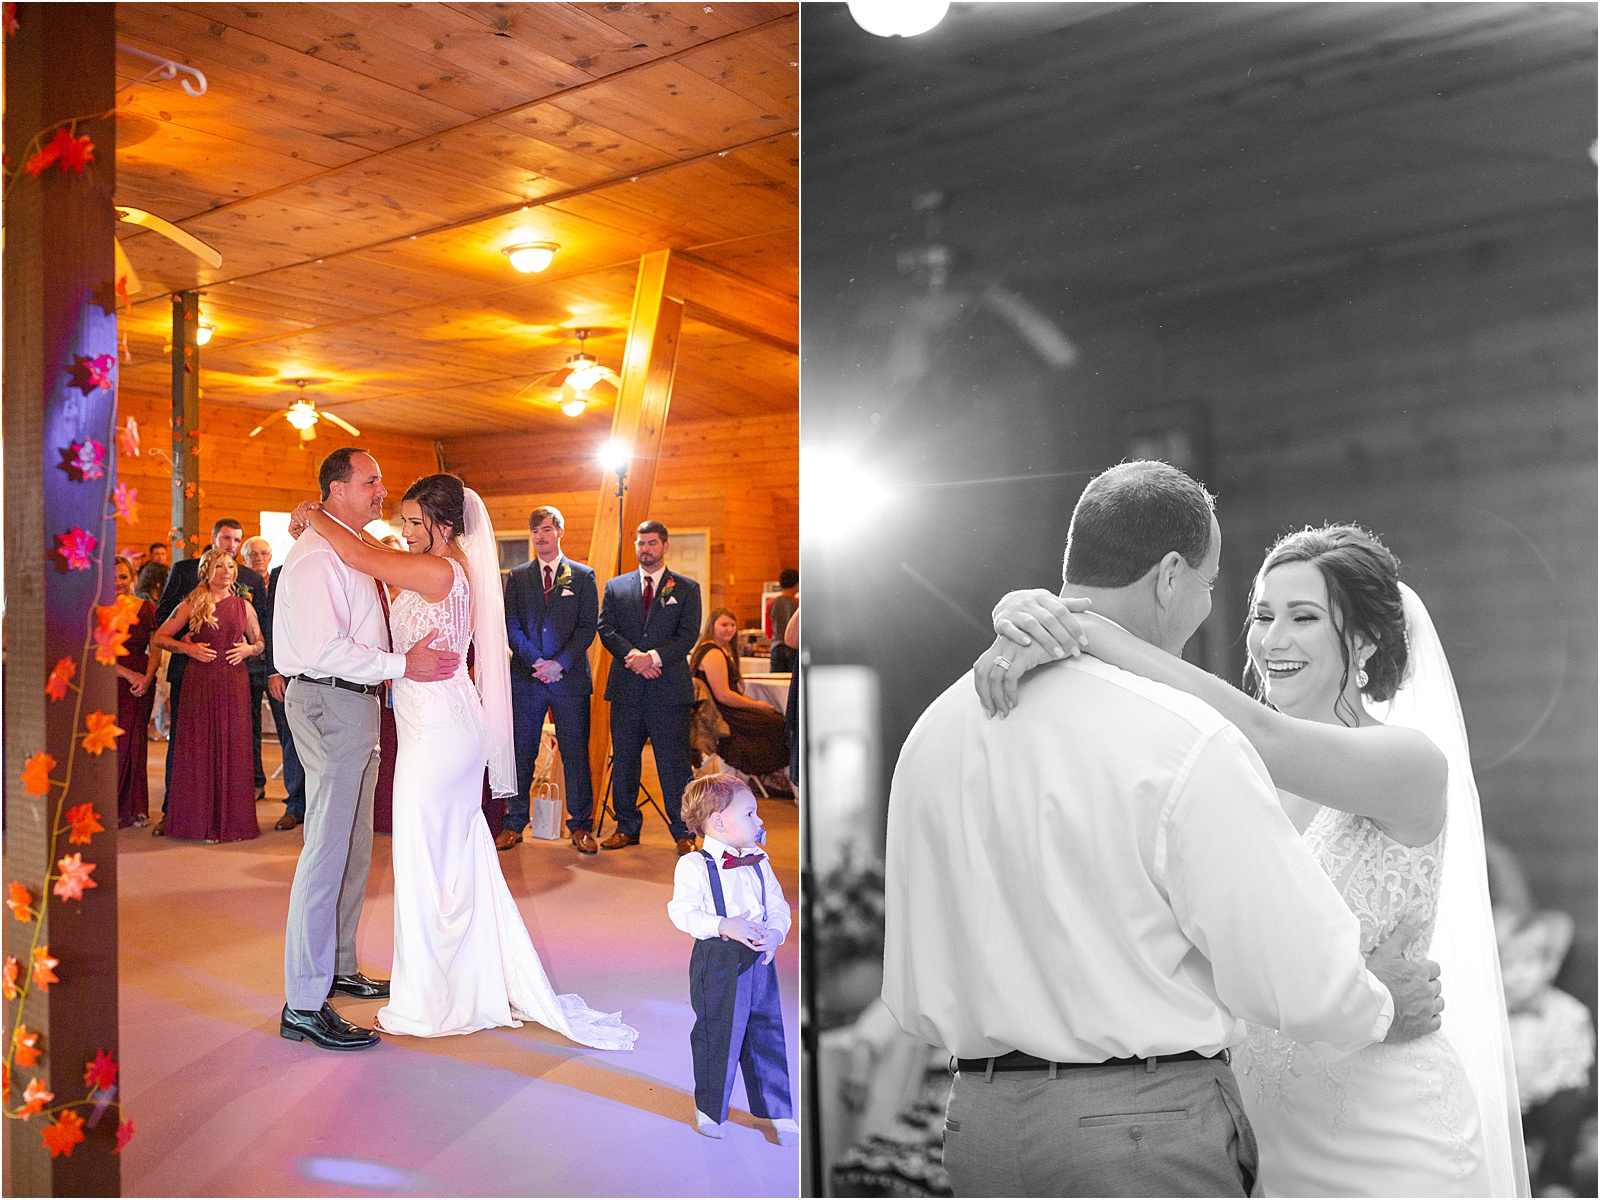 Father daughter dance at a barn wedding venue